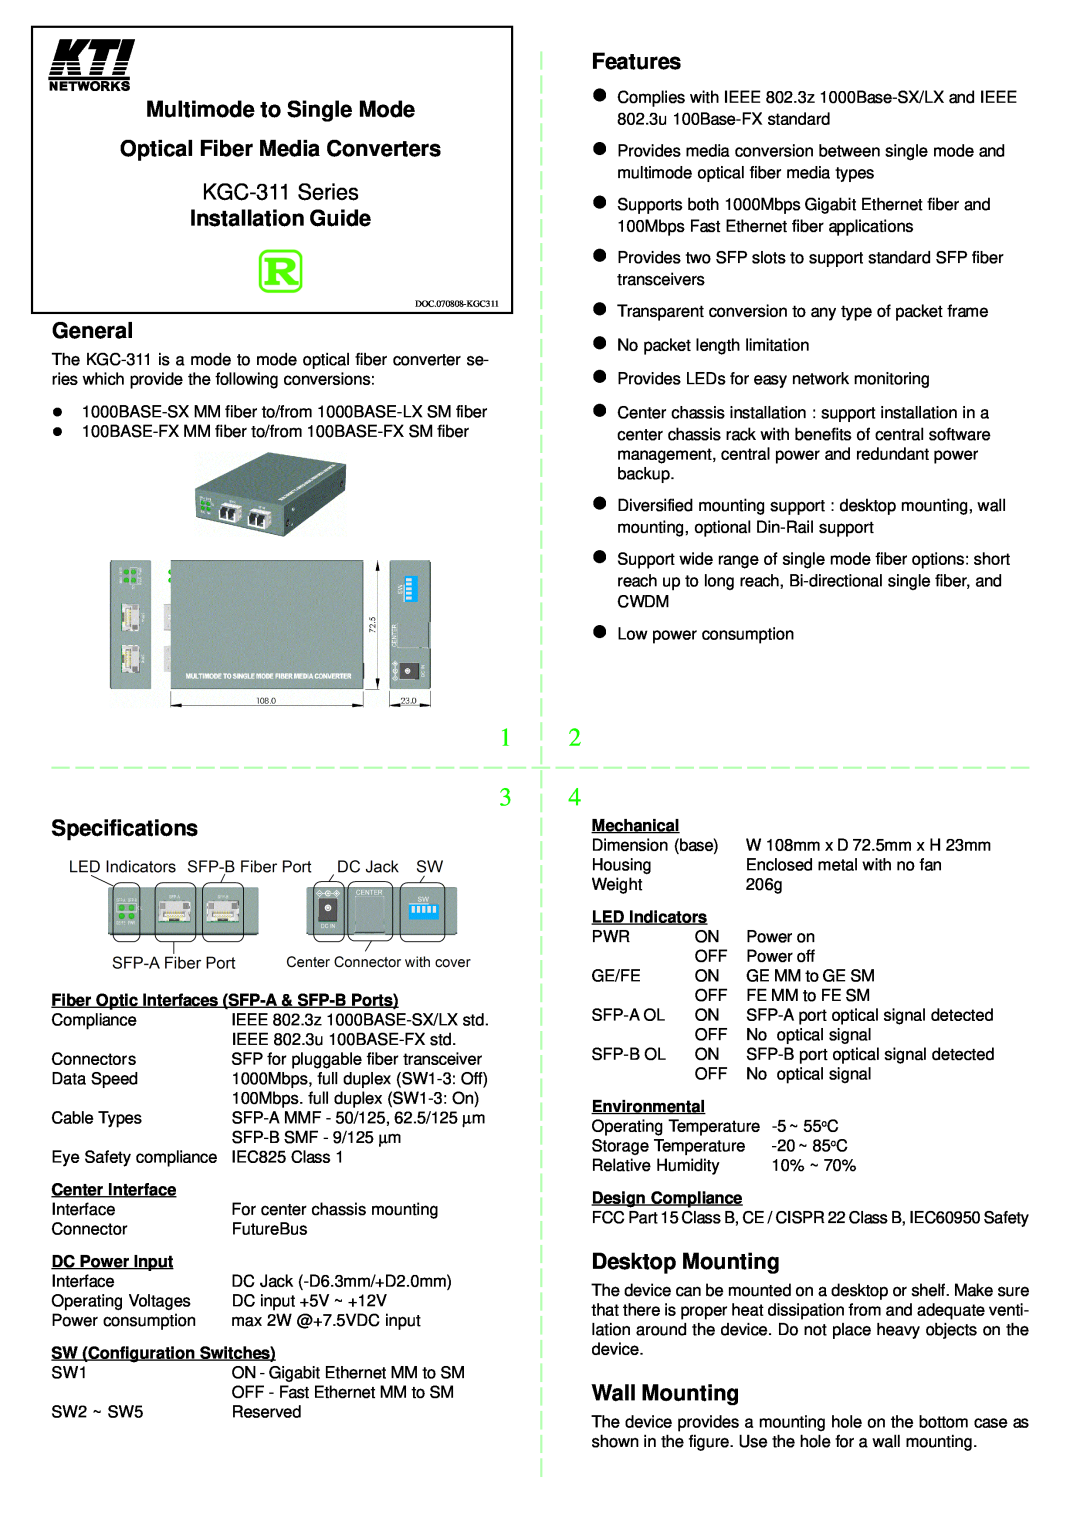 KTI Networks Multimode to Single Mode Optical Fiber Media Converter specifications Installation Guide, General, Features 